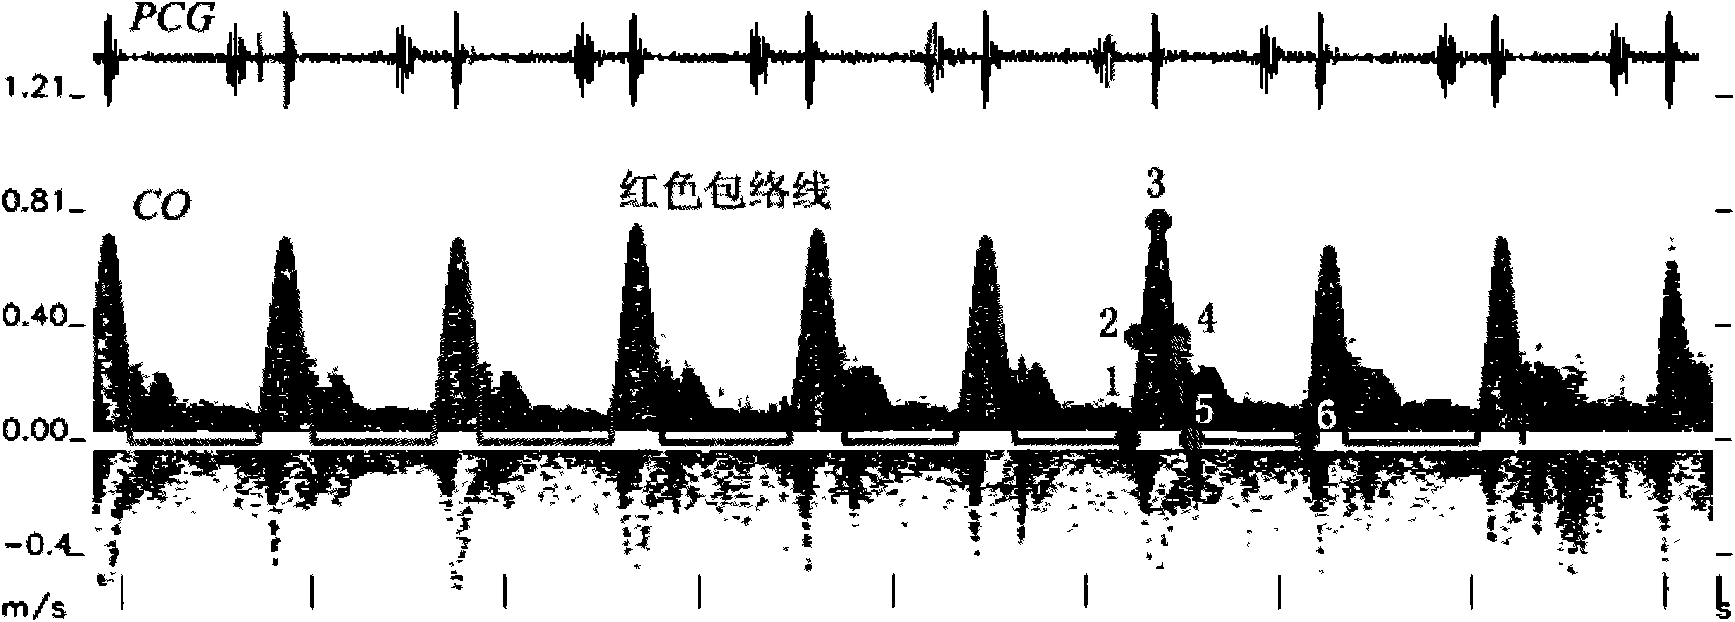 Method for recognizing ultrasonic spectrum enveloped peaks by combining cardiac sound